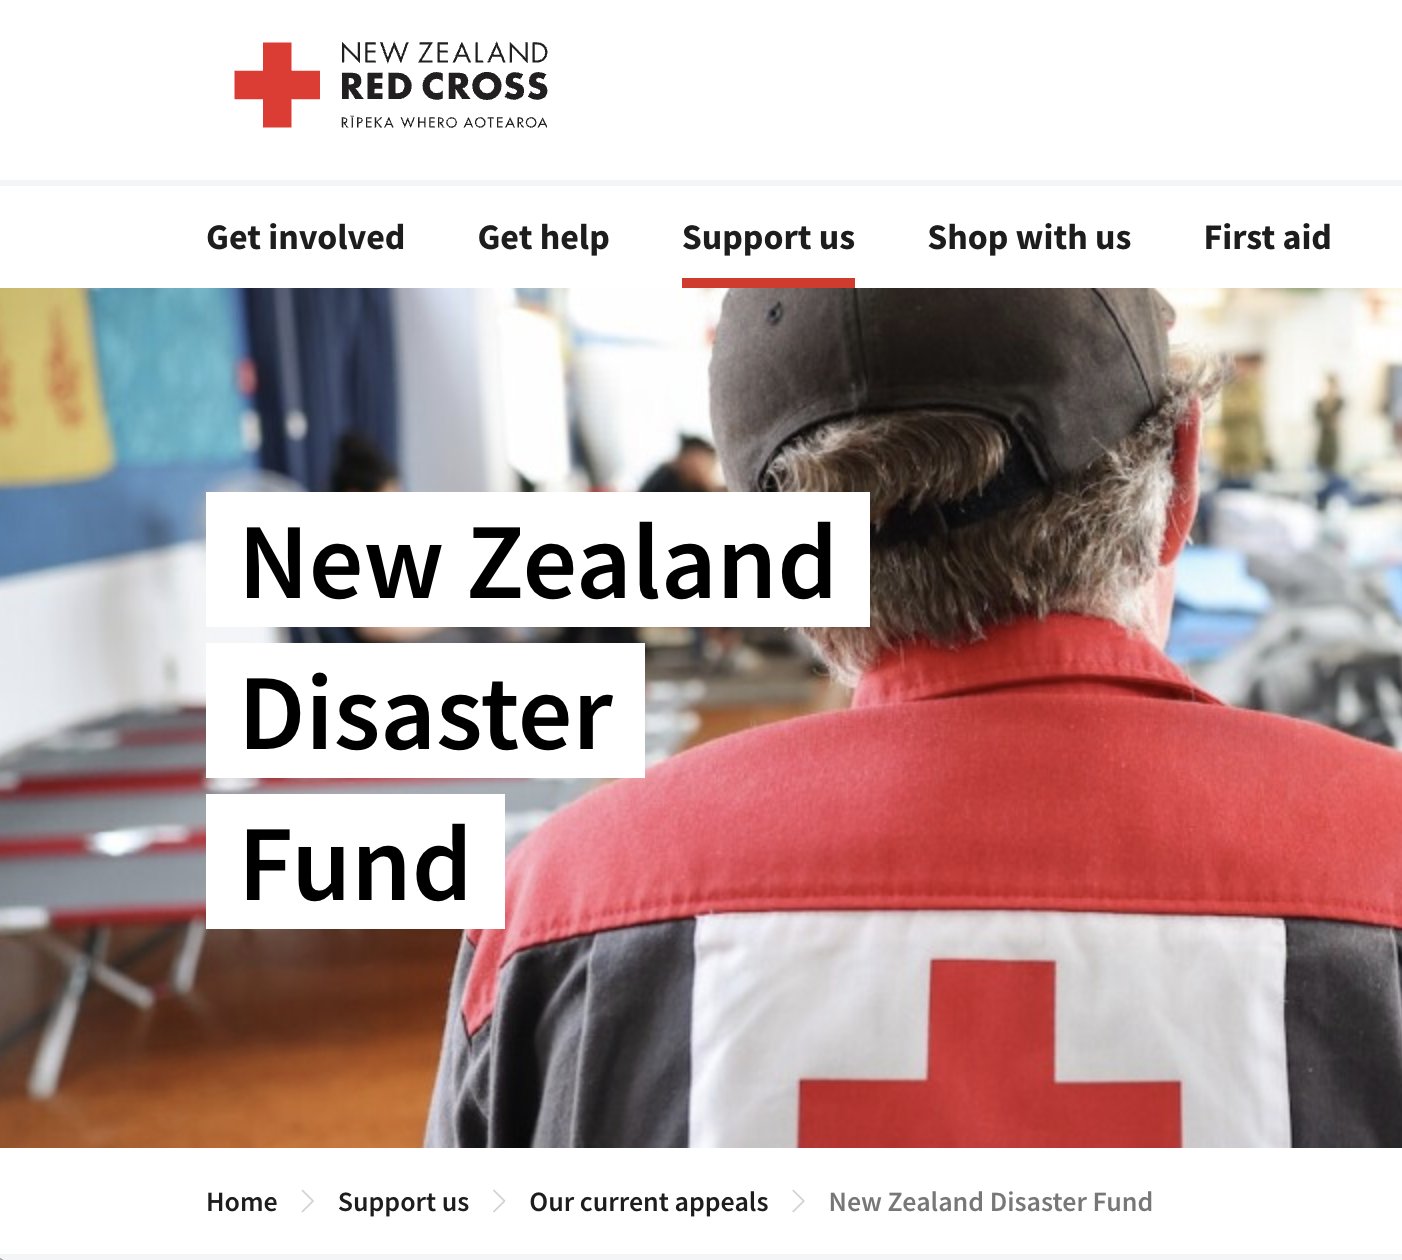 WeatherWatch.co.nz on Twitter: "We support the @NZRedCross. If you can, please donate to New Zealand Disaster Fund: https://t.co/5DFaeoJa7q / Twitter